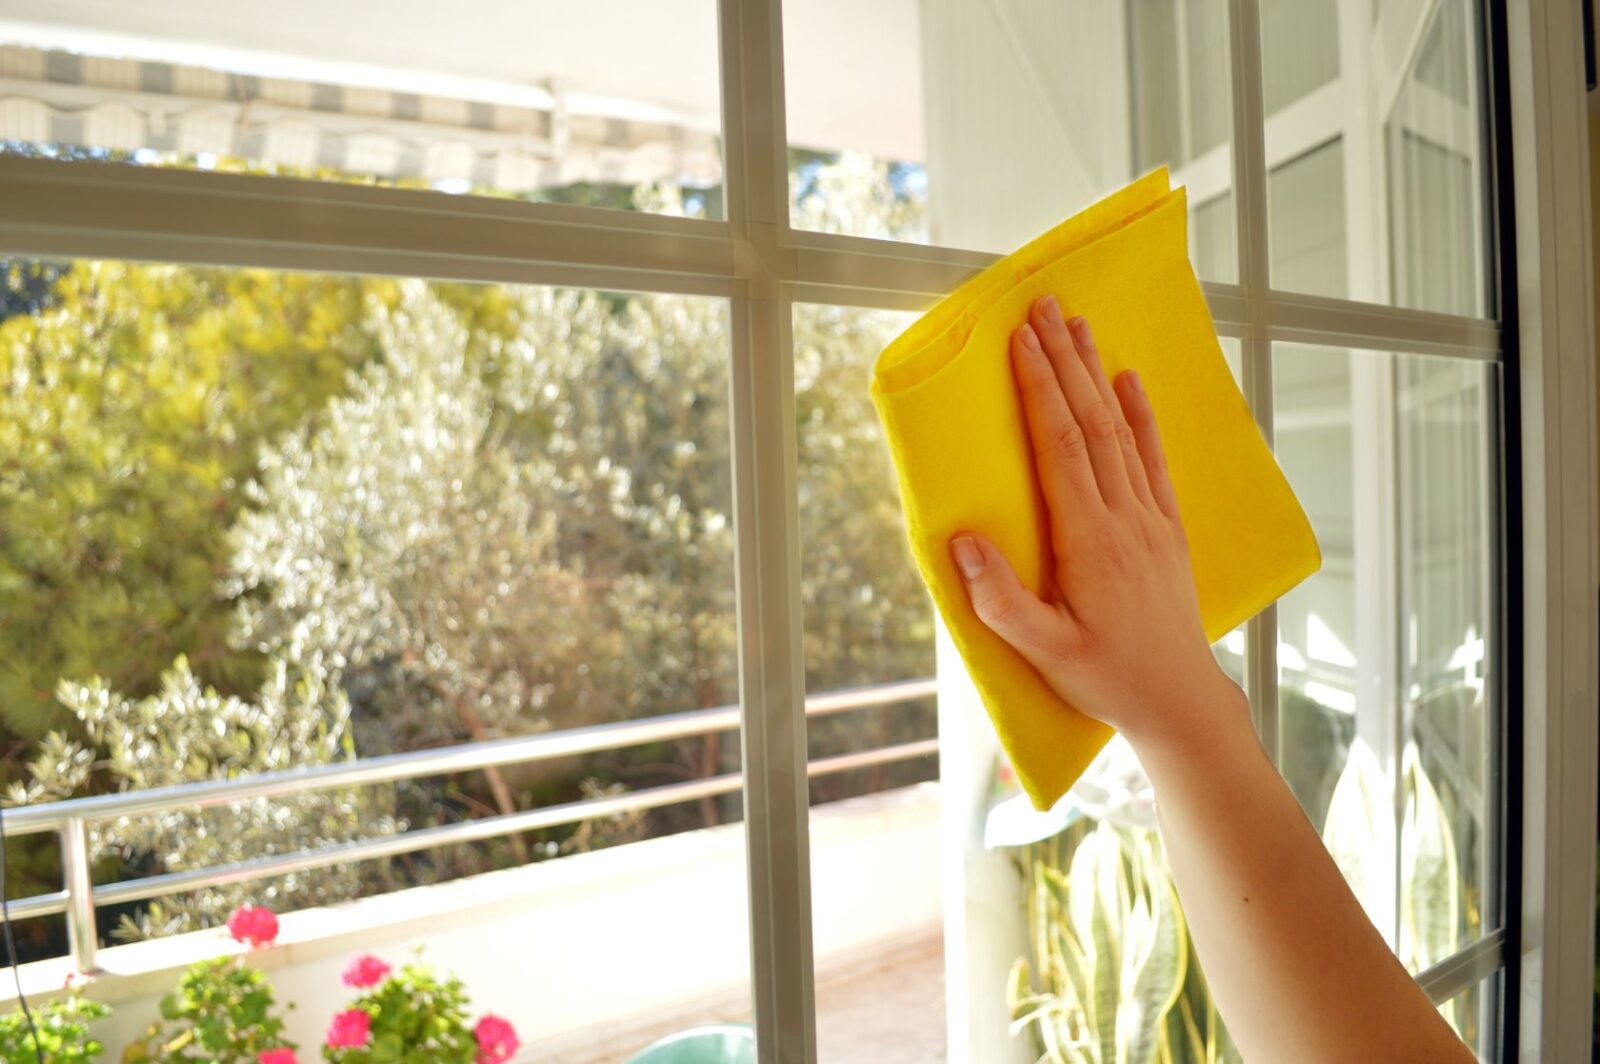 Cleaning & Maintaining Windows